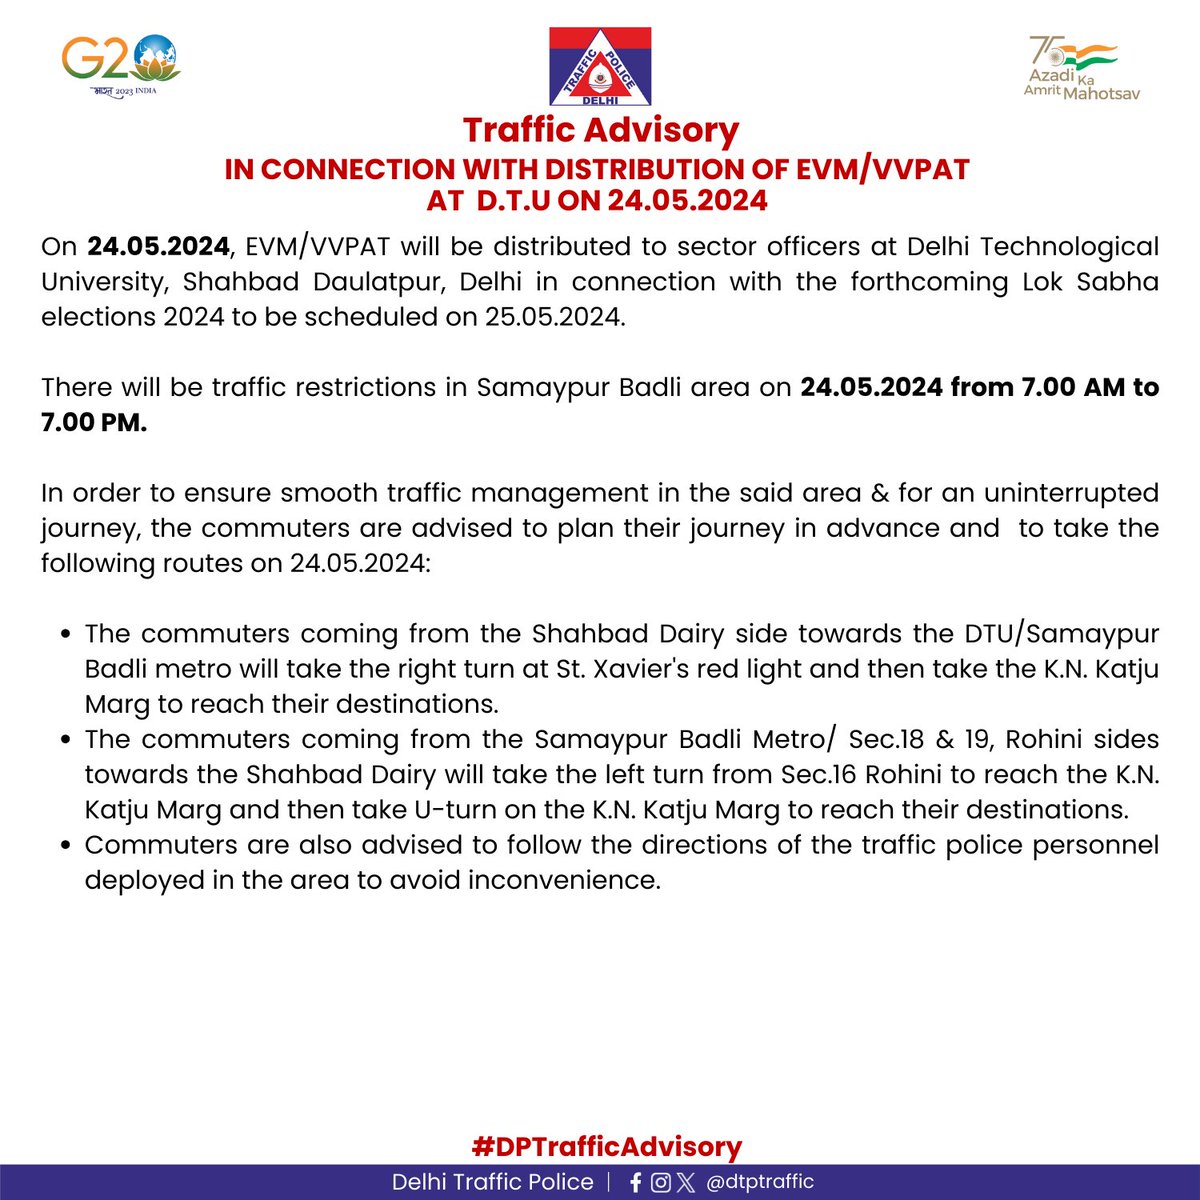 raffic Advisory In view of distribution of EVM/VVPAT at Delhi Technological University on 24.05.2024, traffic restrictions will be effective from 7.00 am to 7.00 pm. Kindly follow the advisory. #DPTrafficAdvisory